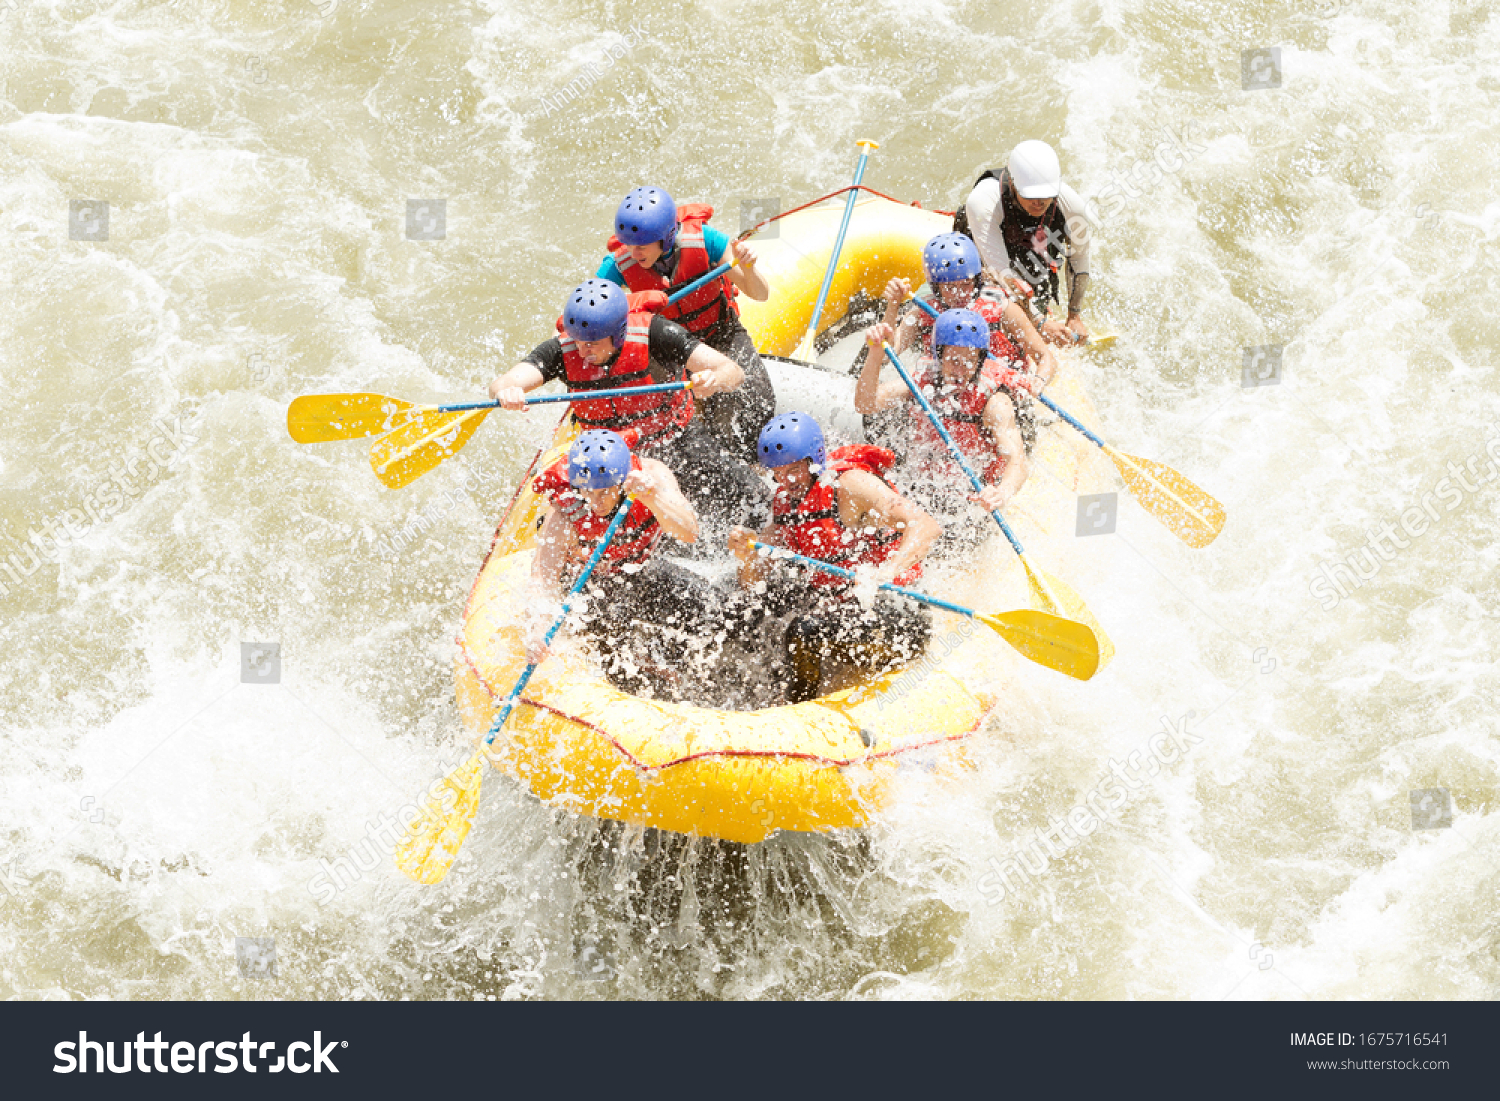 A team of men and a woman navigate through white water rapids on a raft, facing an adrenaline-pumping challenge with perseverance and determination. #1675716541